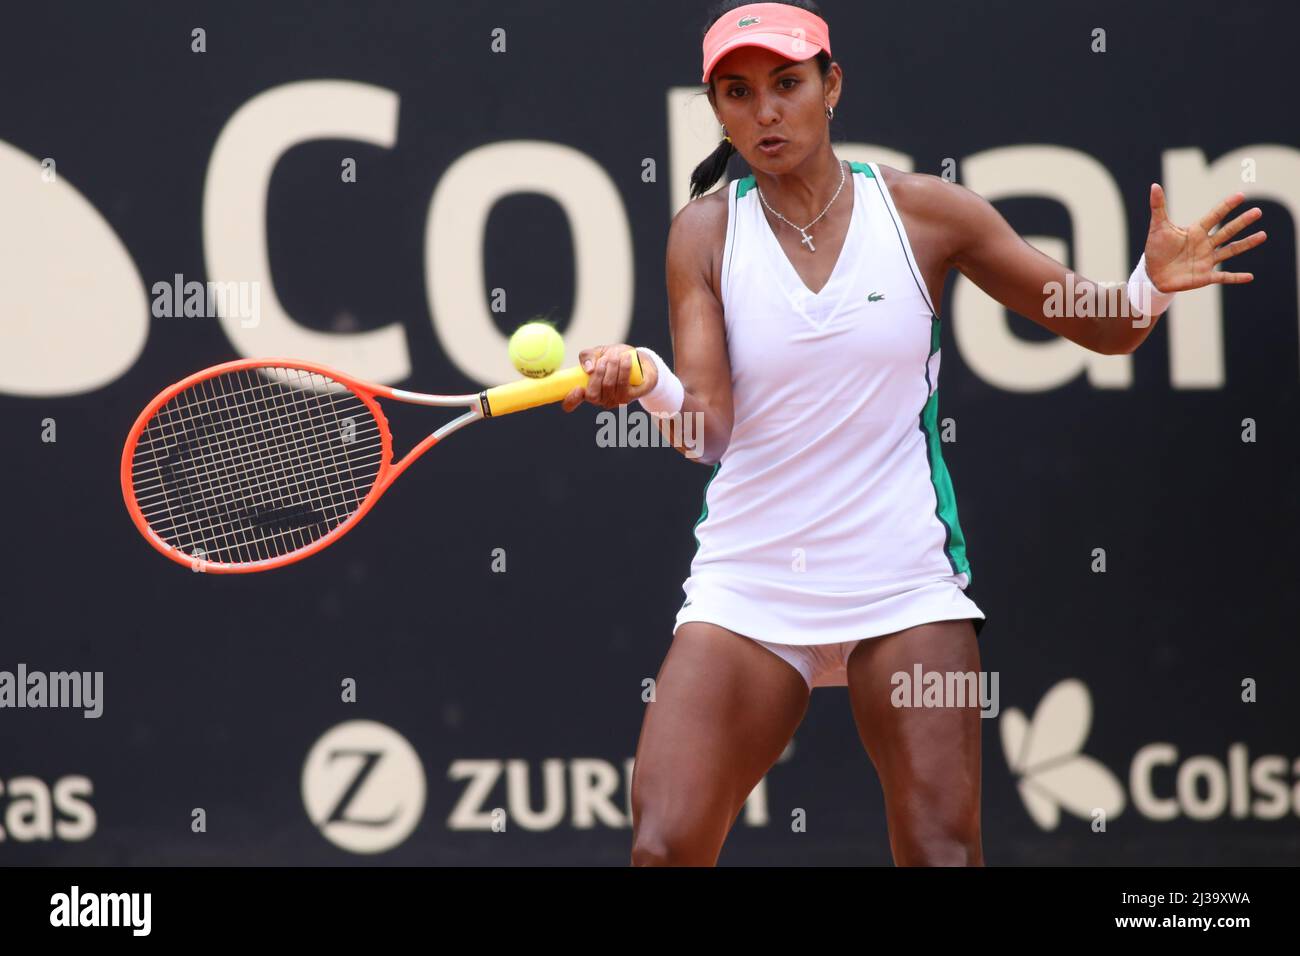 Bogota, Colombia. 6th Apr, 2022. Yuliana Lizarazo of Colombia plays during  the match against Mirjam Bjorklund of Sweden at the Copa Colsanitas WTA  Tournament on April 6, 2022 in Bogota, Colombia. (Credit